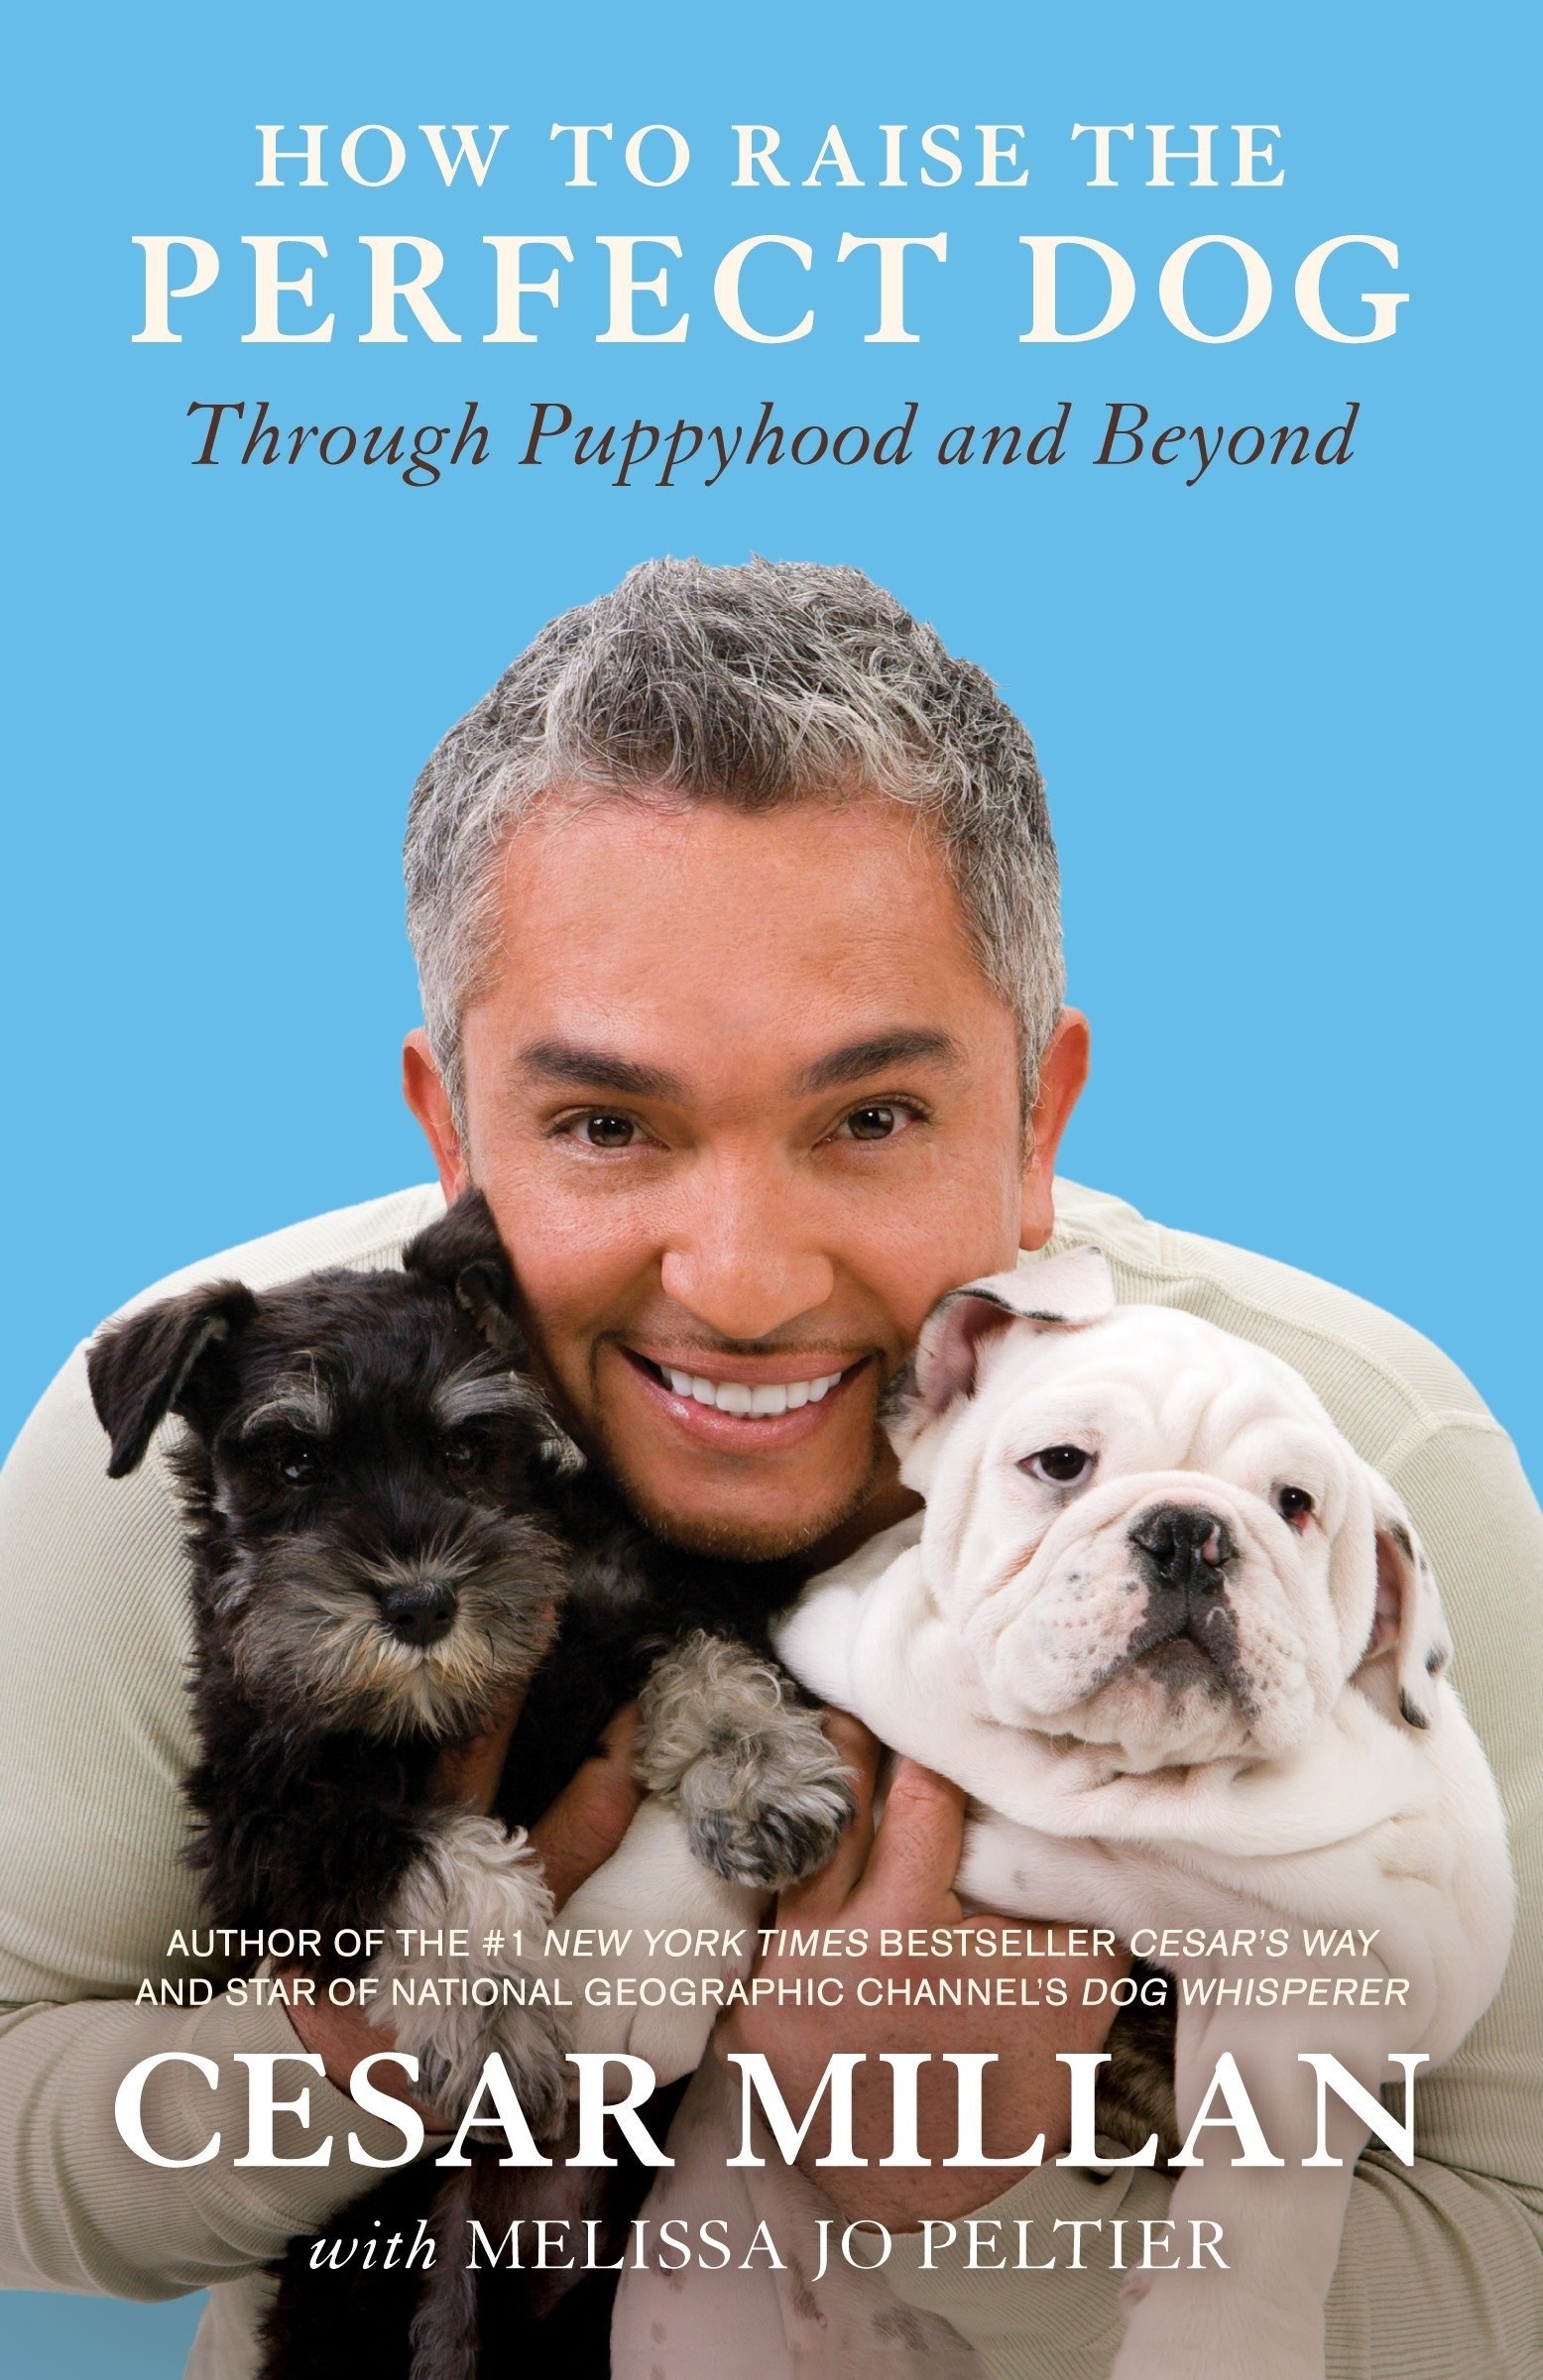 The cover of the book with author Cesar Millan